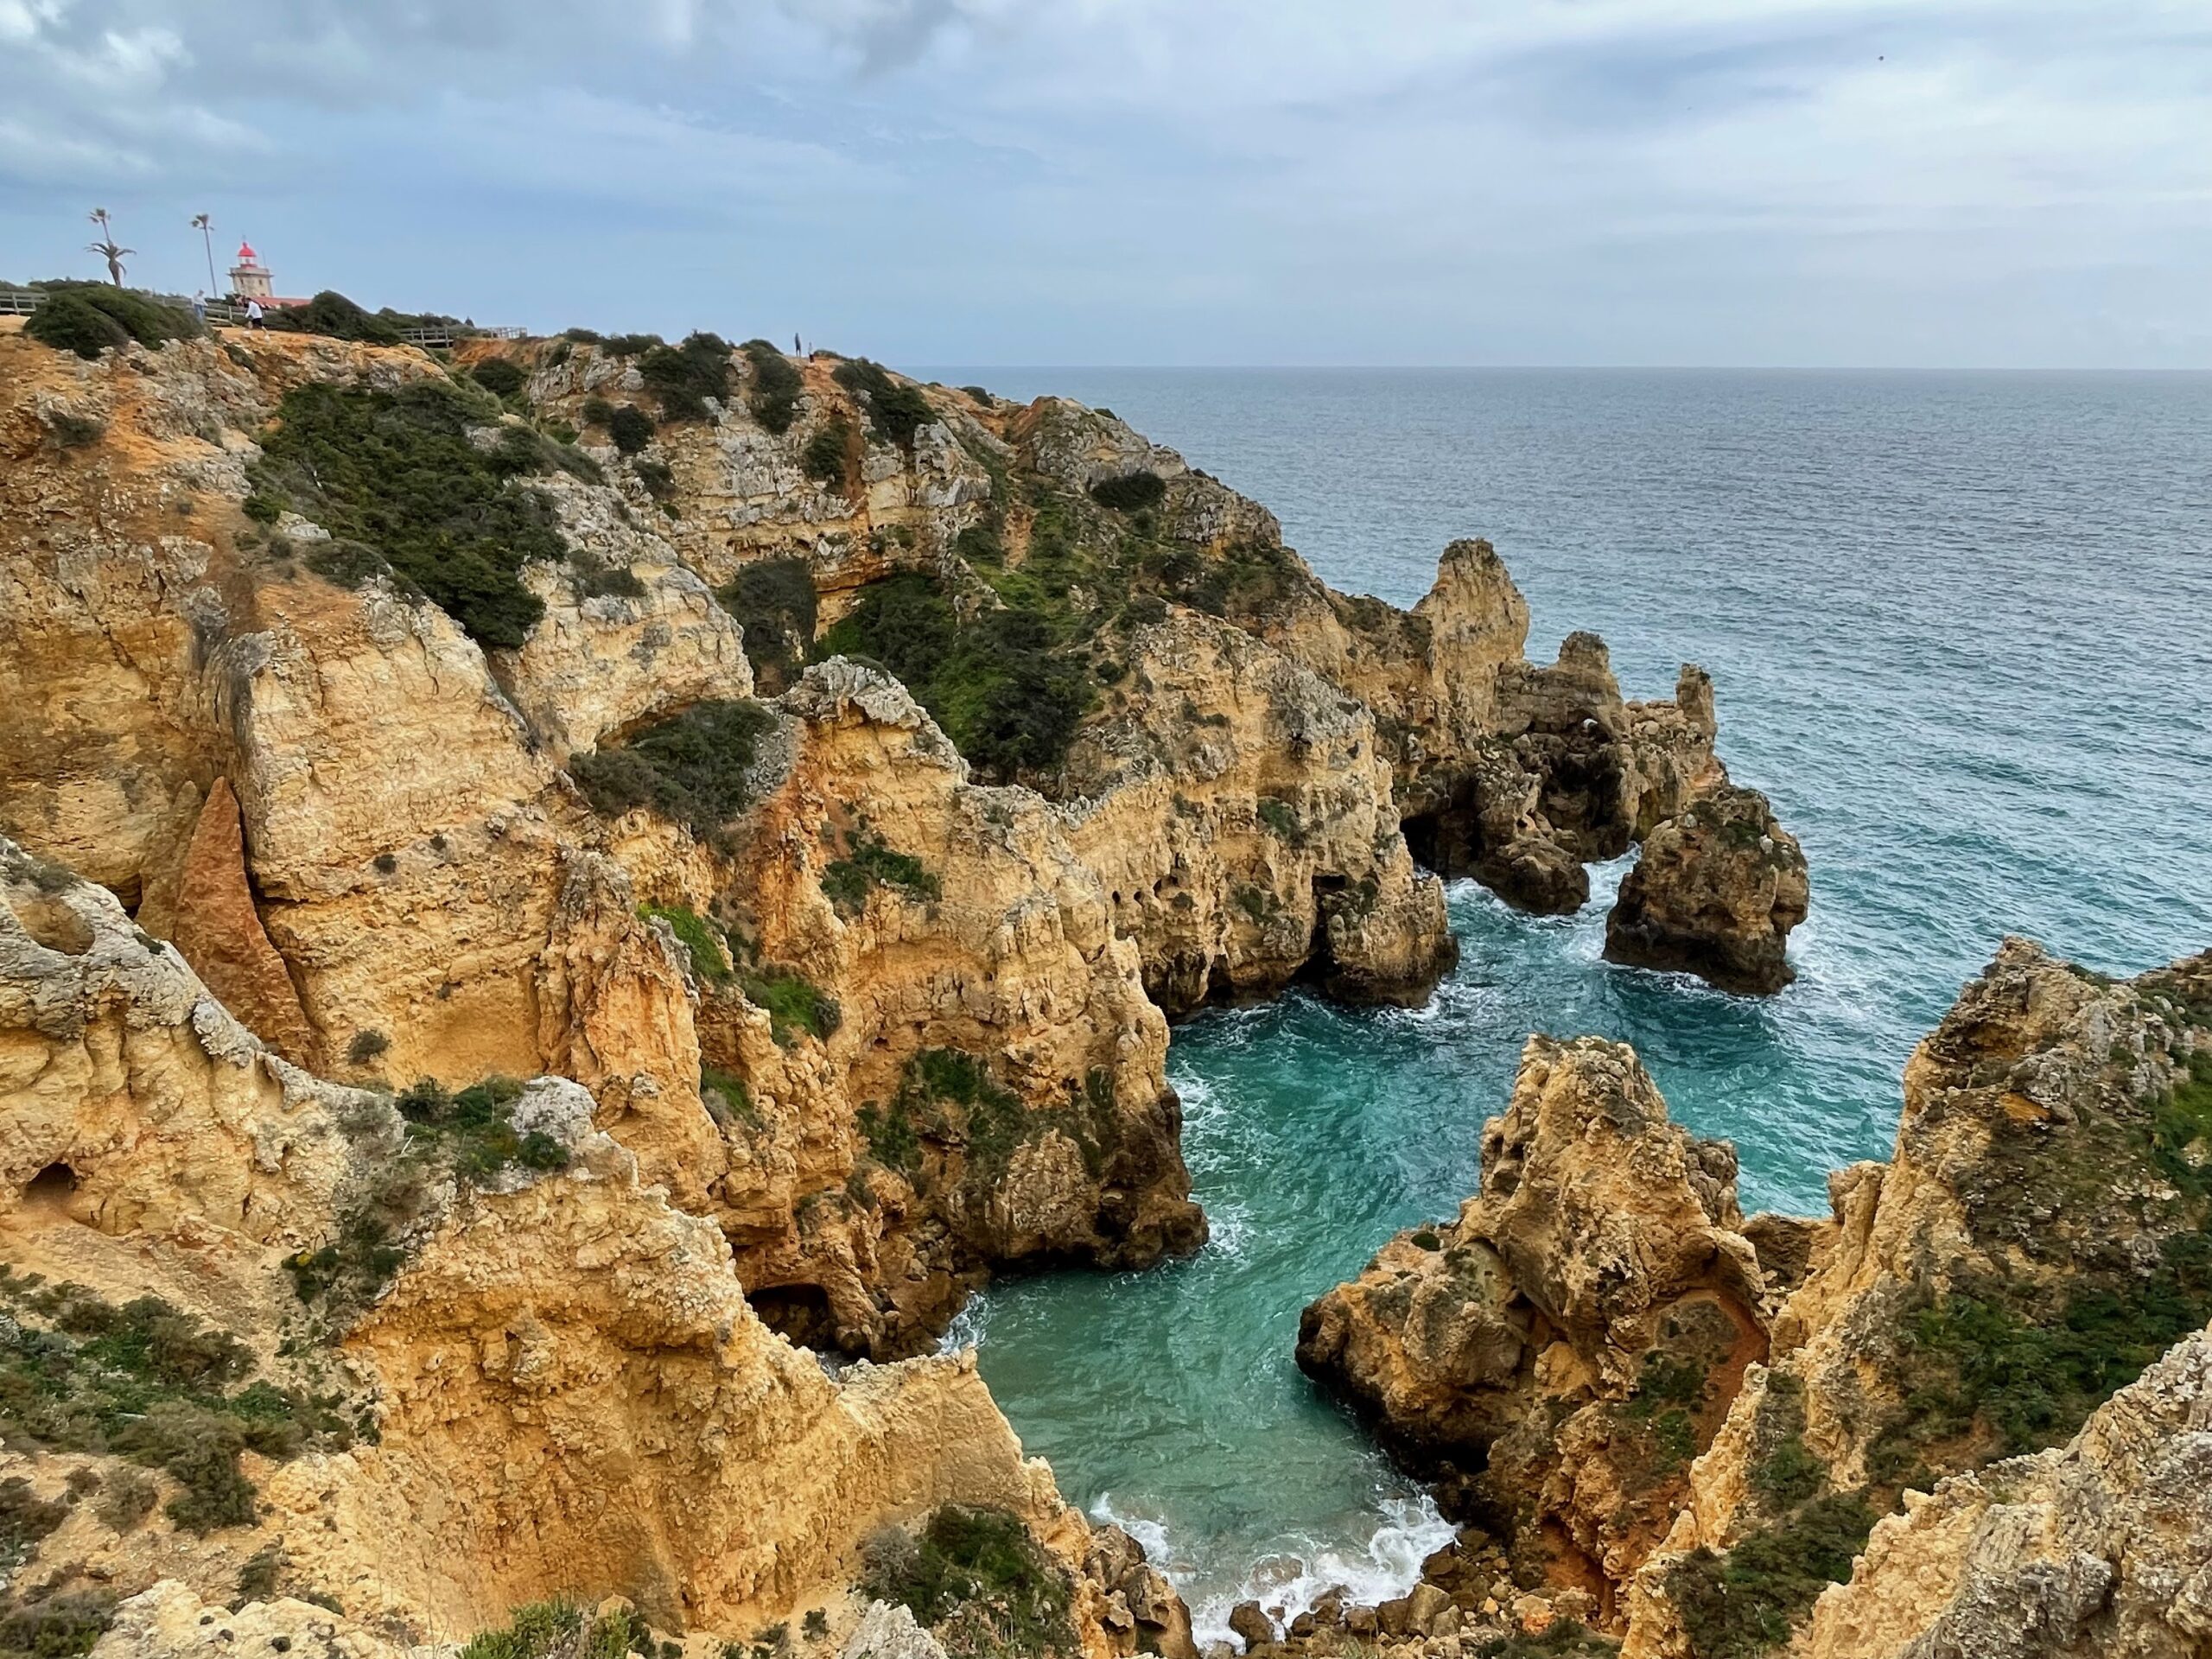 What to see in Algarve? Balanced one week itinerary full of nature and culture.